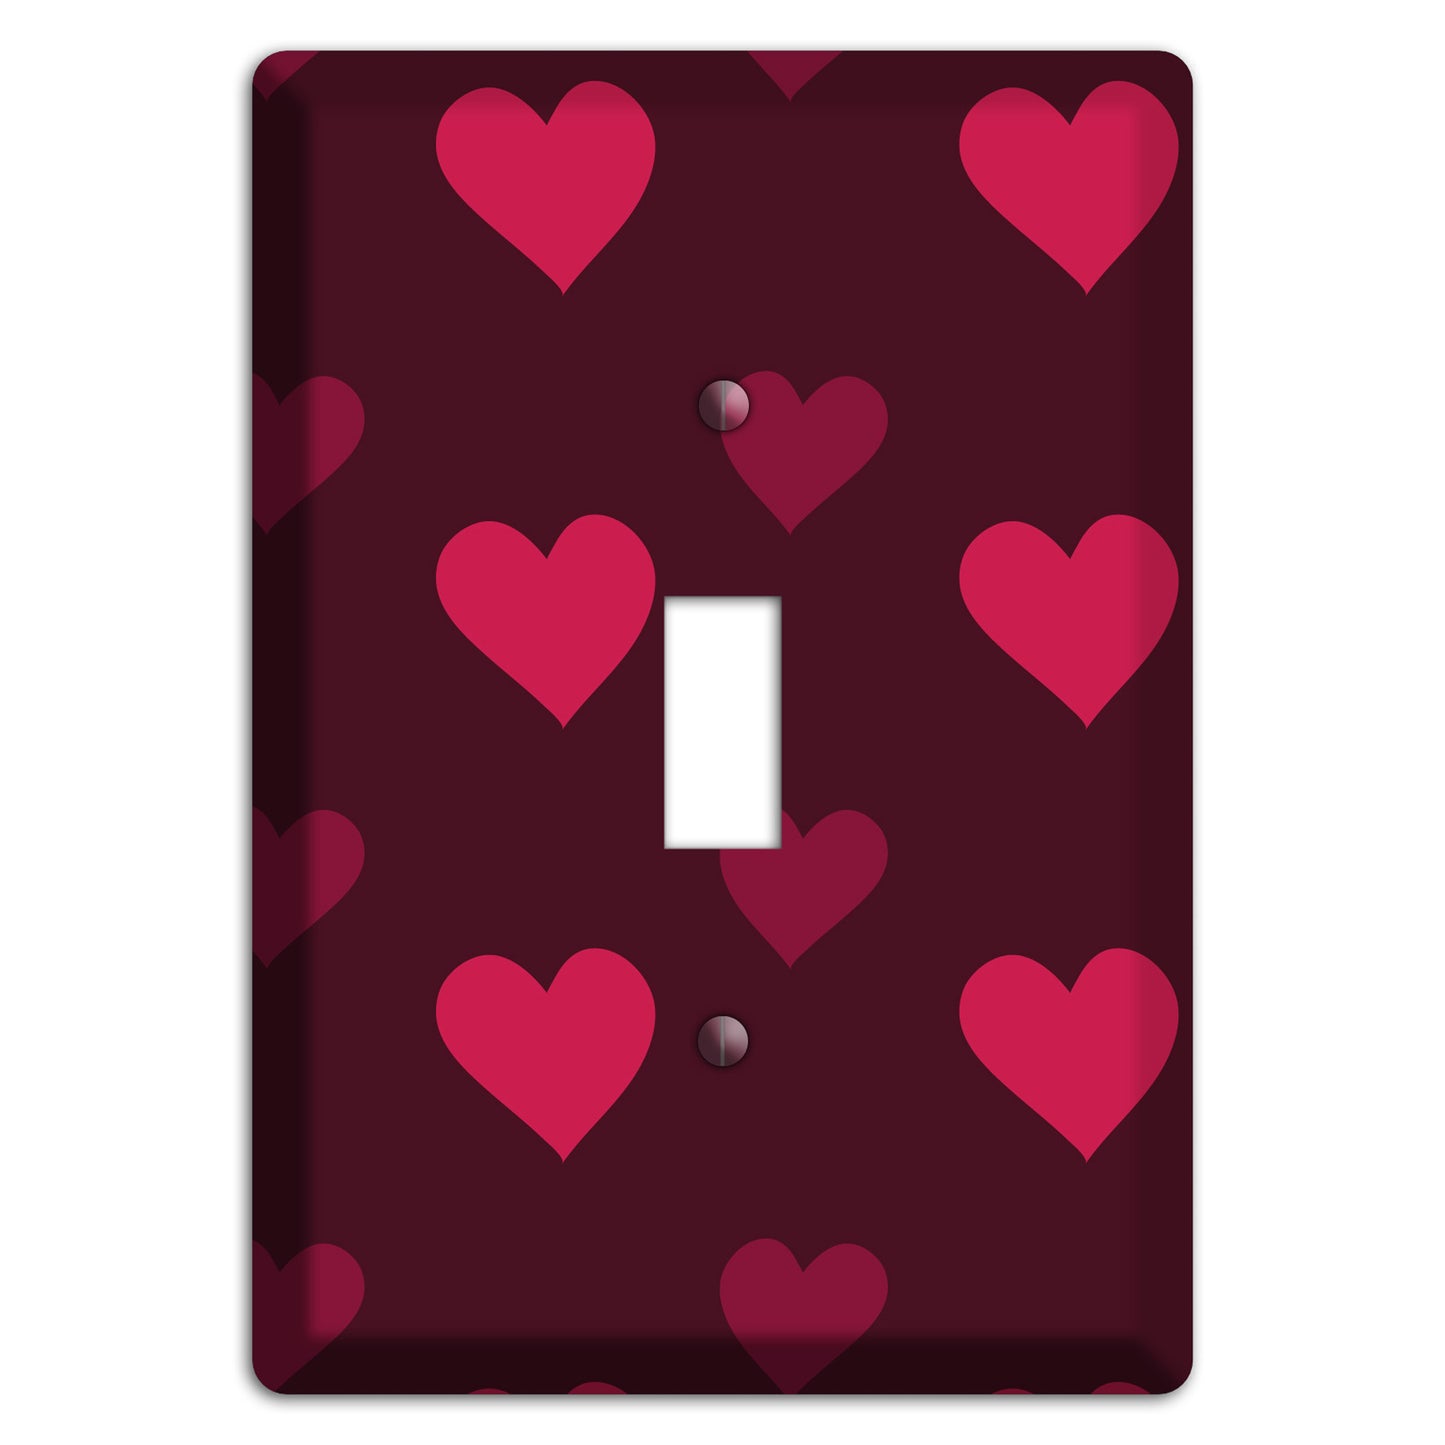 Tiled Large Hearts Cover Plates